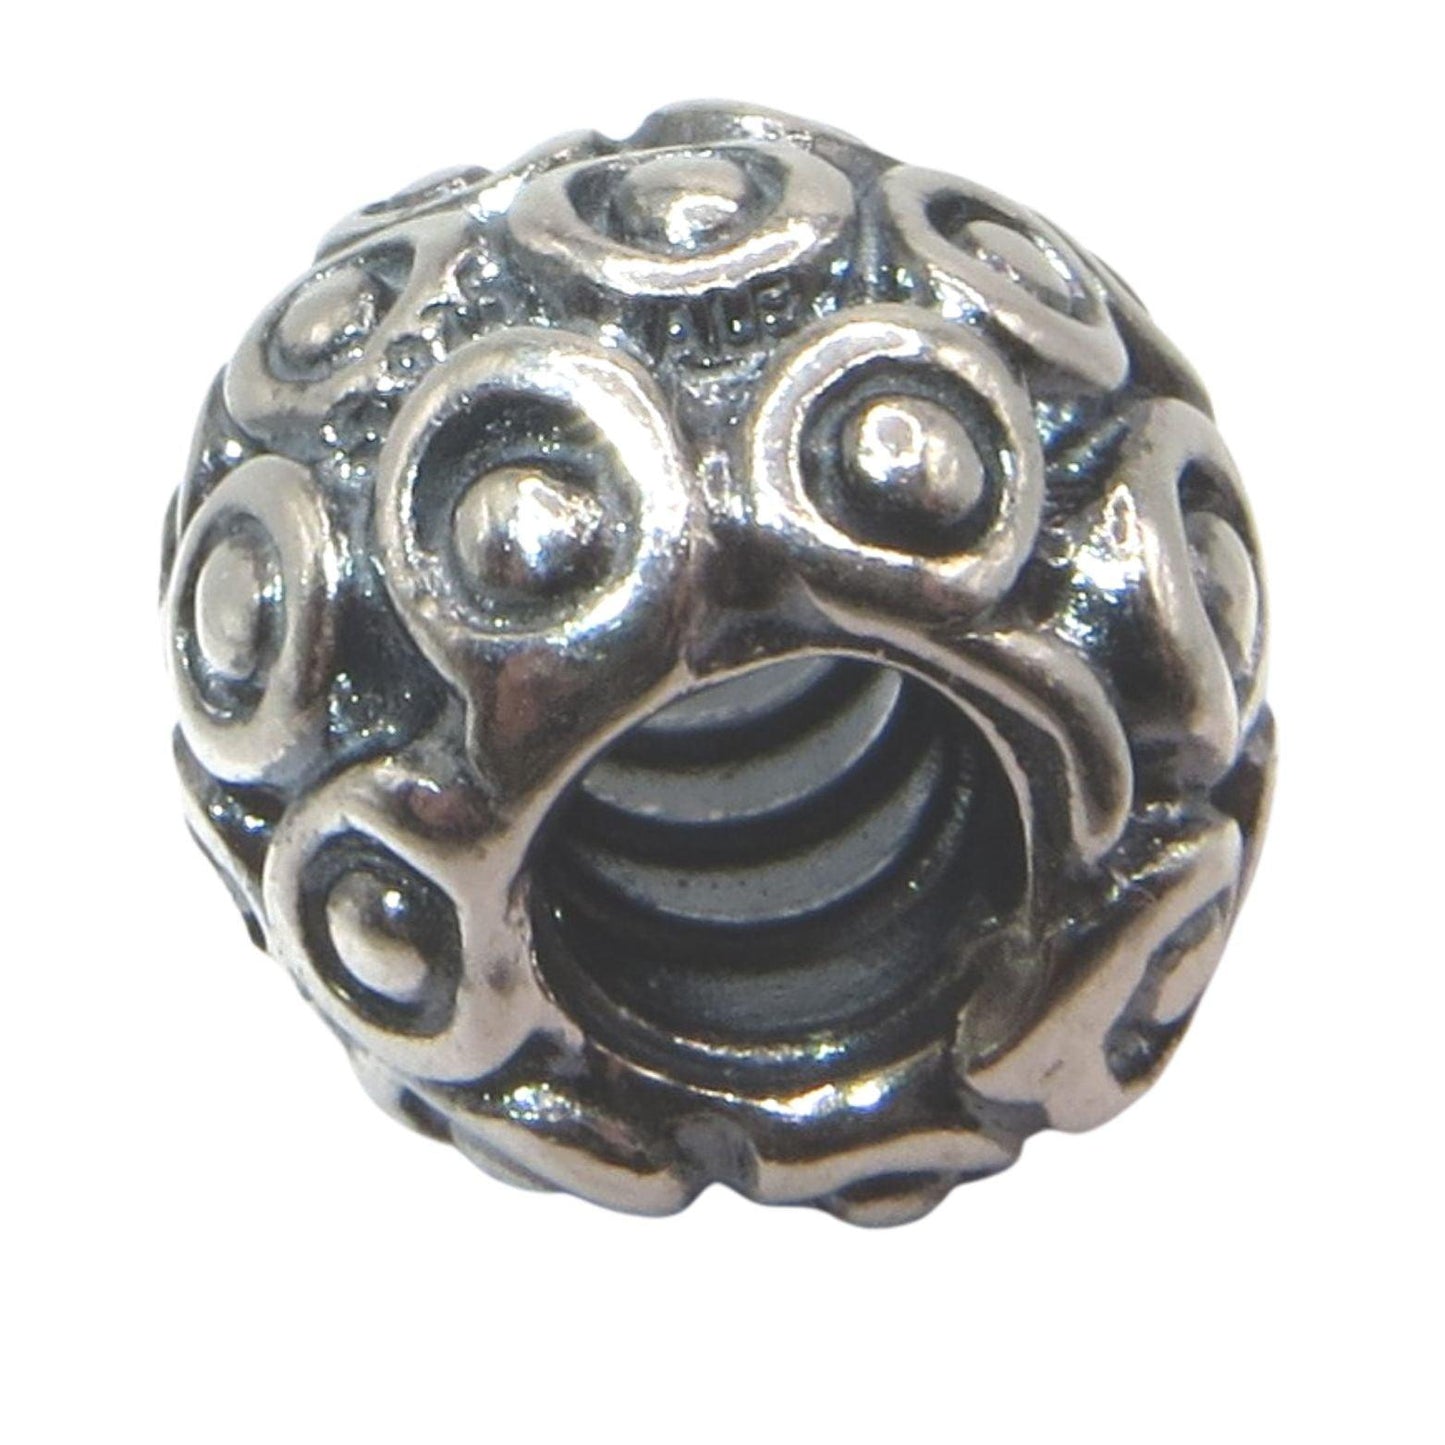 PANDORA 790866 Celebration Circles and Dots - Oxidized Sterling Silver Ball Charm - Decorated with Circles and Dots - Women's - Charming Jilly